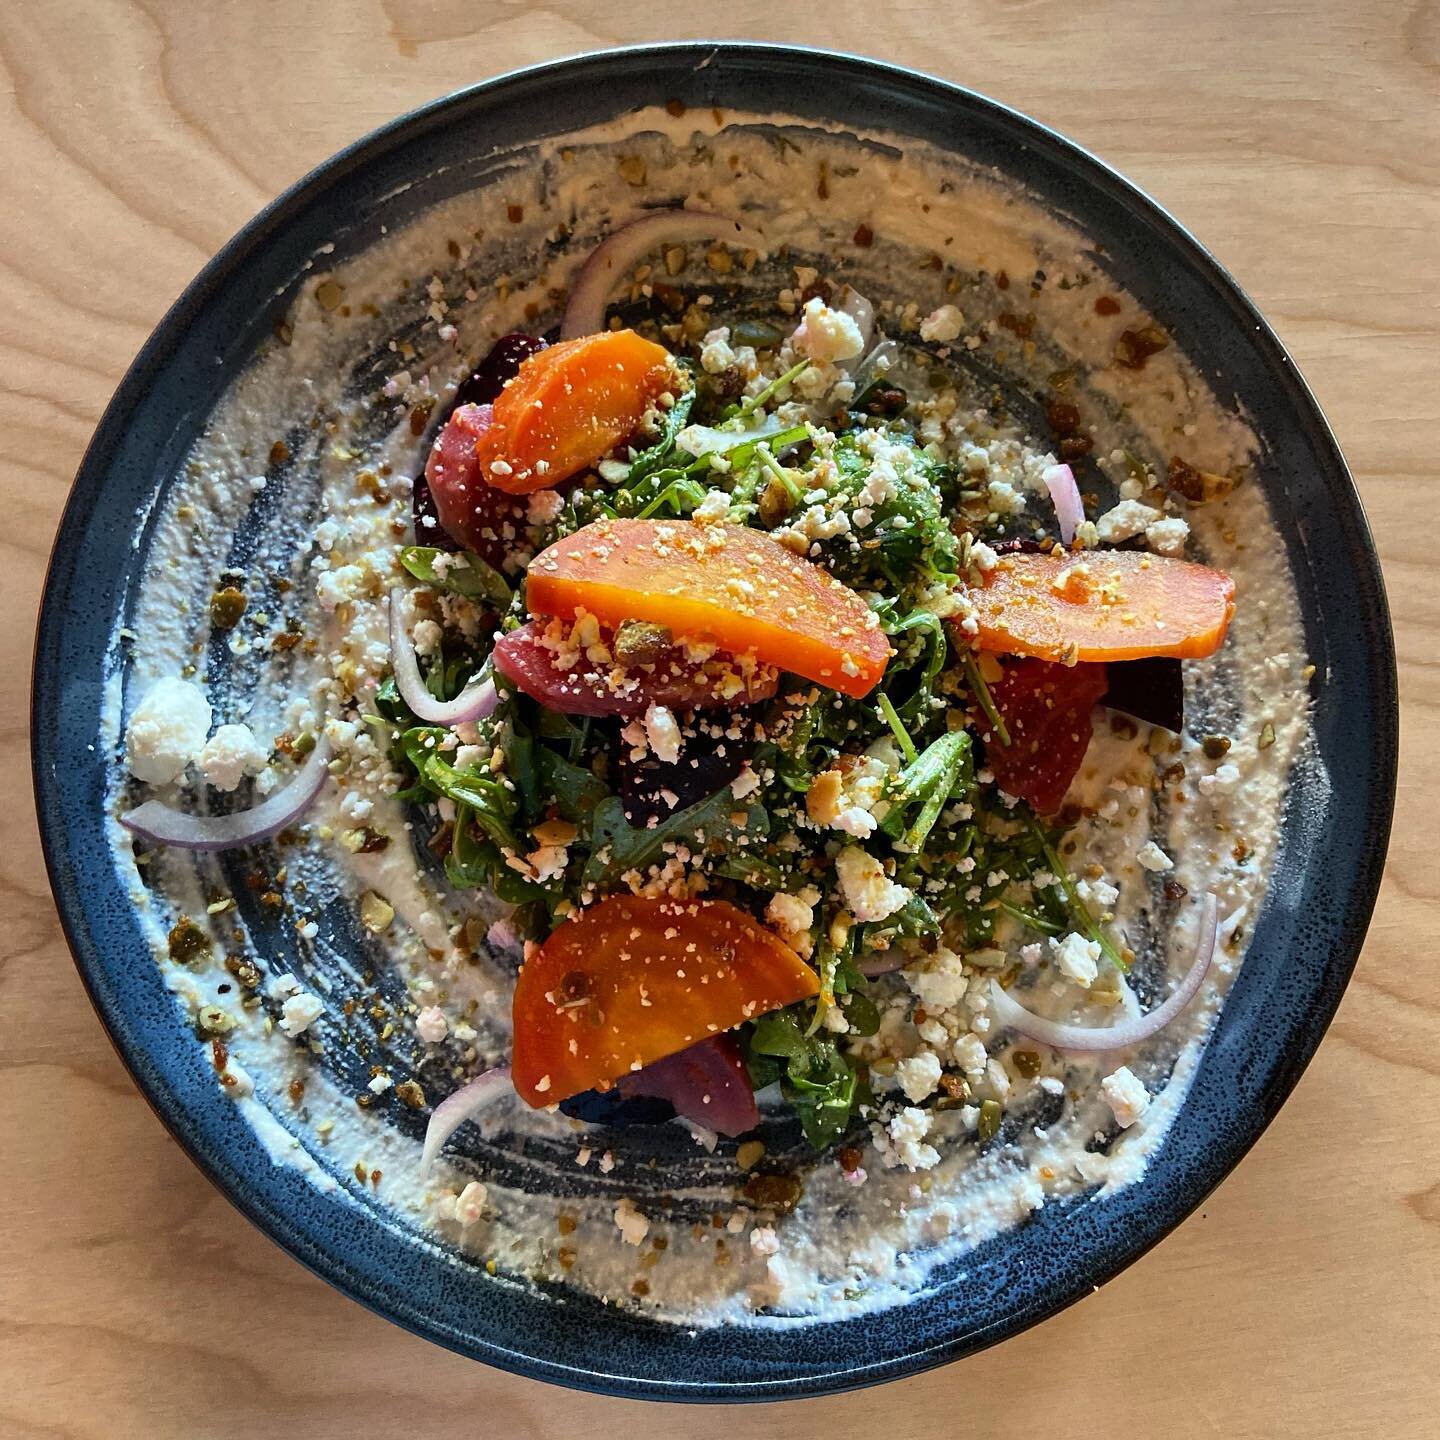 🚨🚨NEW SPRING MENU ALERT! Every Wednesday &amp; Thursday $4 Market Garden Beers &amp; $5 house wine from 5-7p! 🎀💗🔆
.
.
Farm Beets- red, golden &amp; candy stripe, horseradish ricotta, arugula, red onion, fresh goat cheese, walnut pepita brittle (